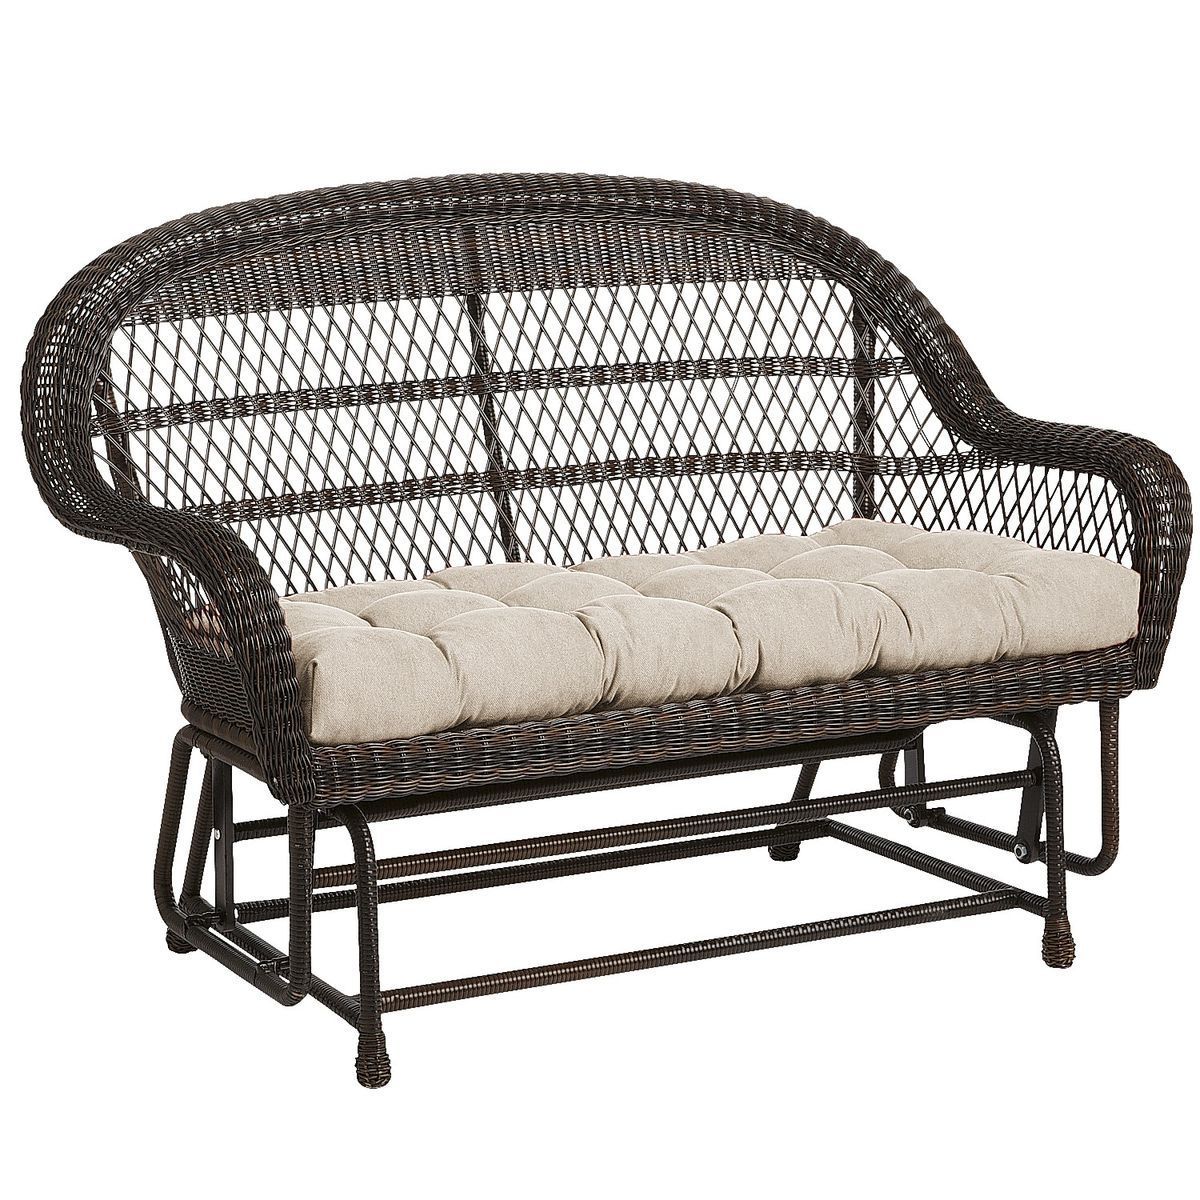 Santa Barbara Glider Settee – Mocha | Pier 1 Imports Within Speckled Glider Benches (View 14 of 25)